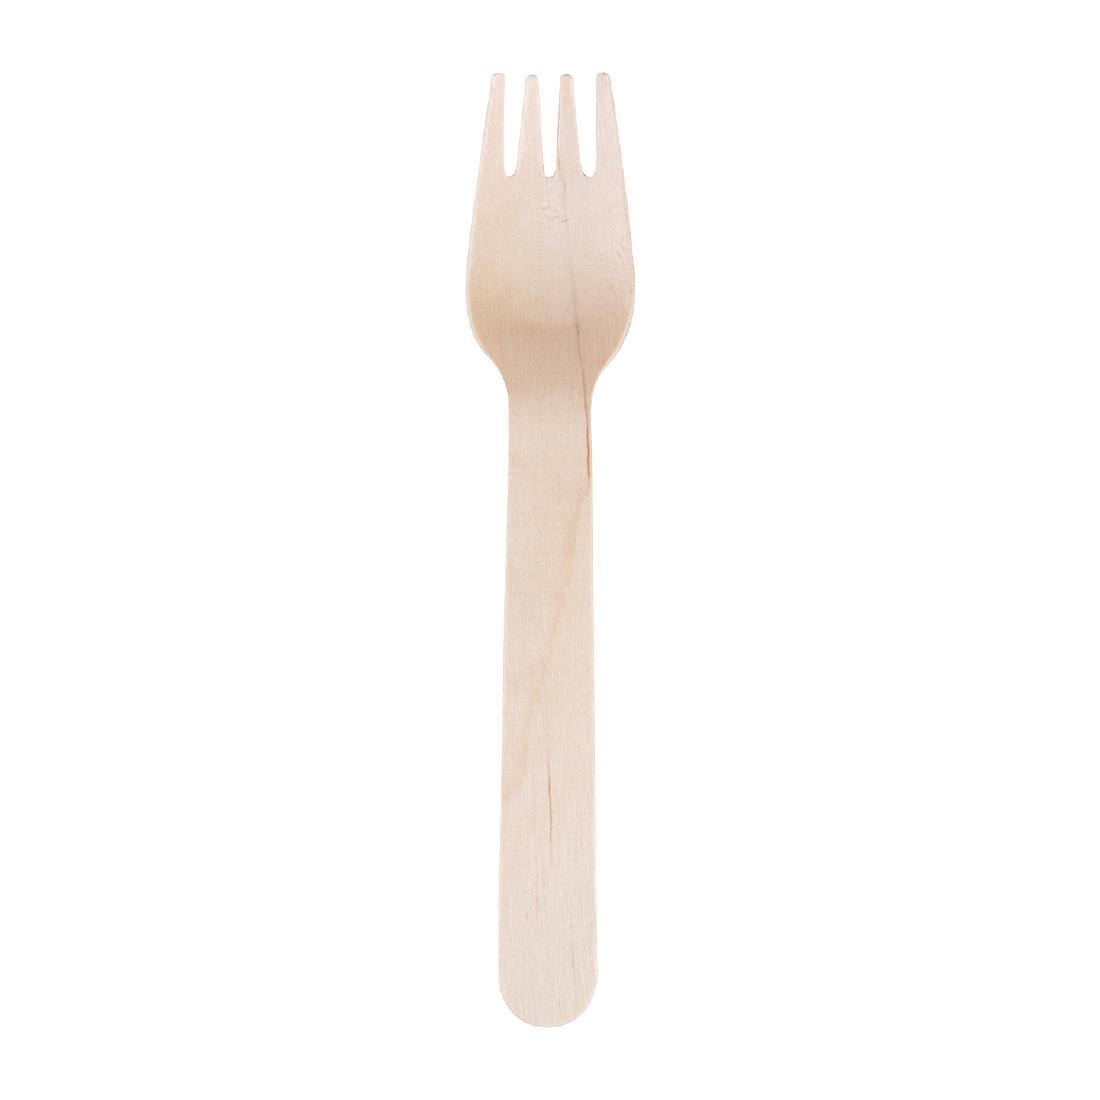 Fiesta Compostable Disposable Wooden Forks (Pack of 100) - CD903  - 2